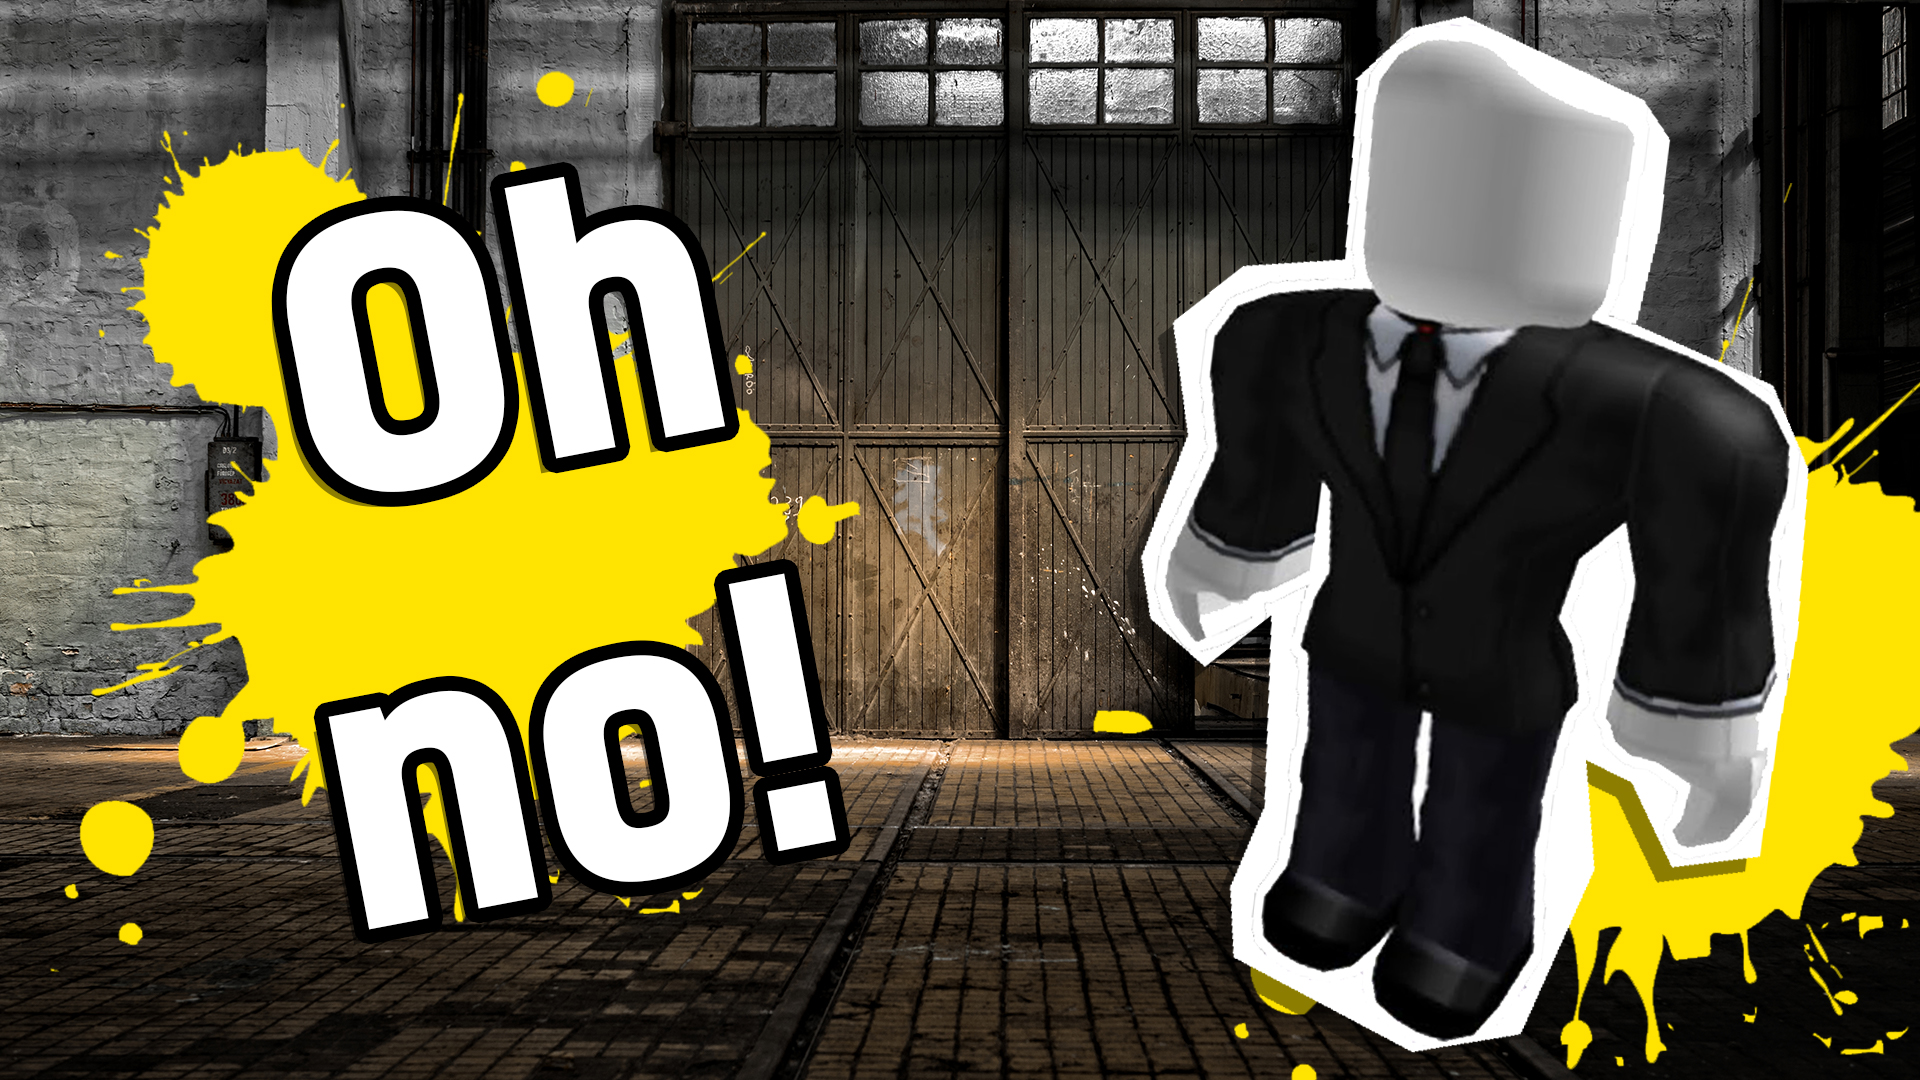 How To Make Slenderman In Roblox 